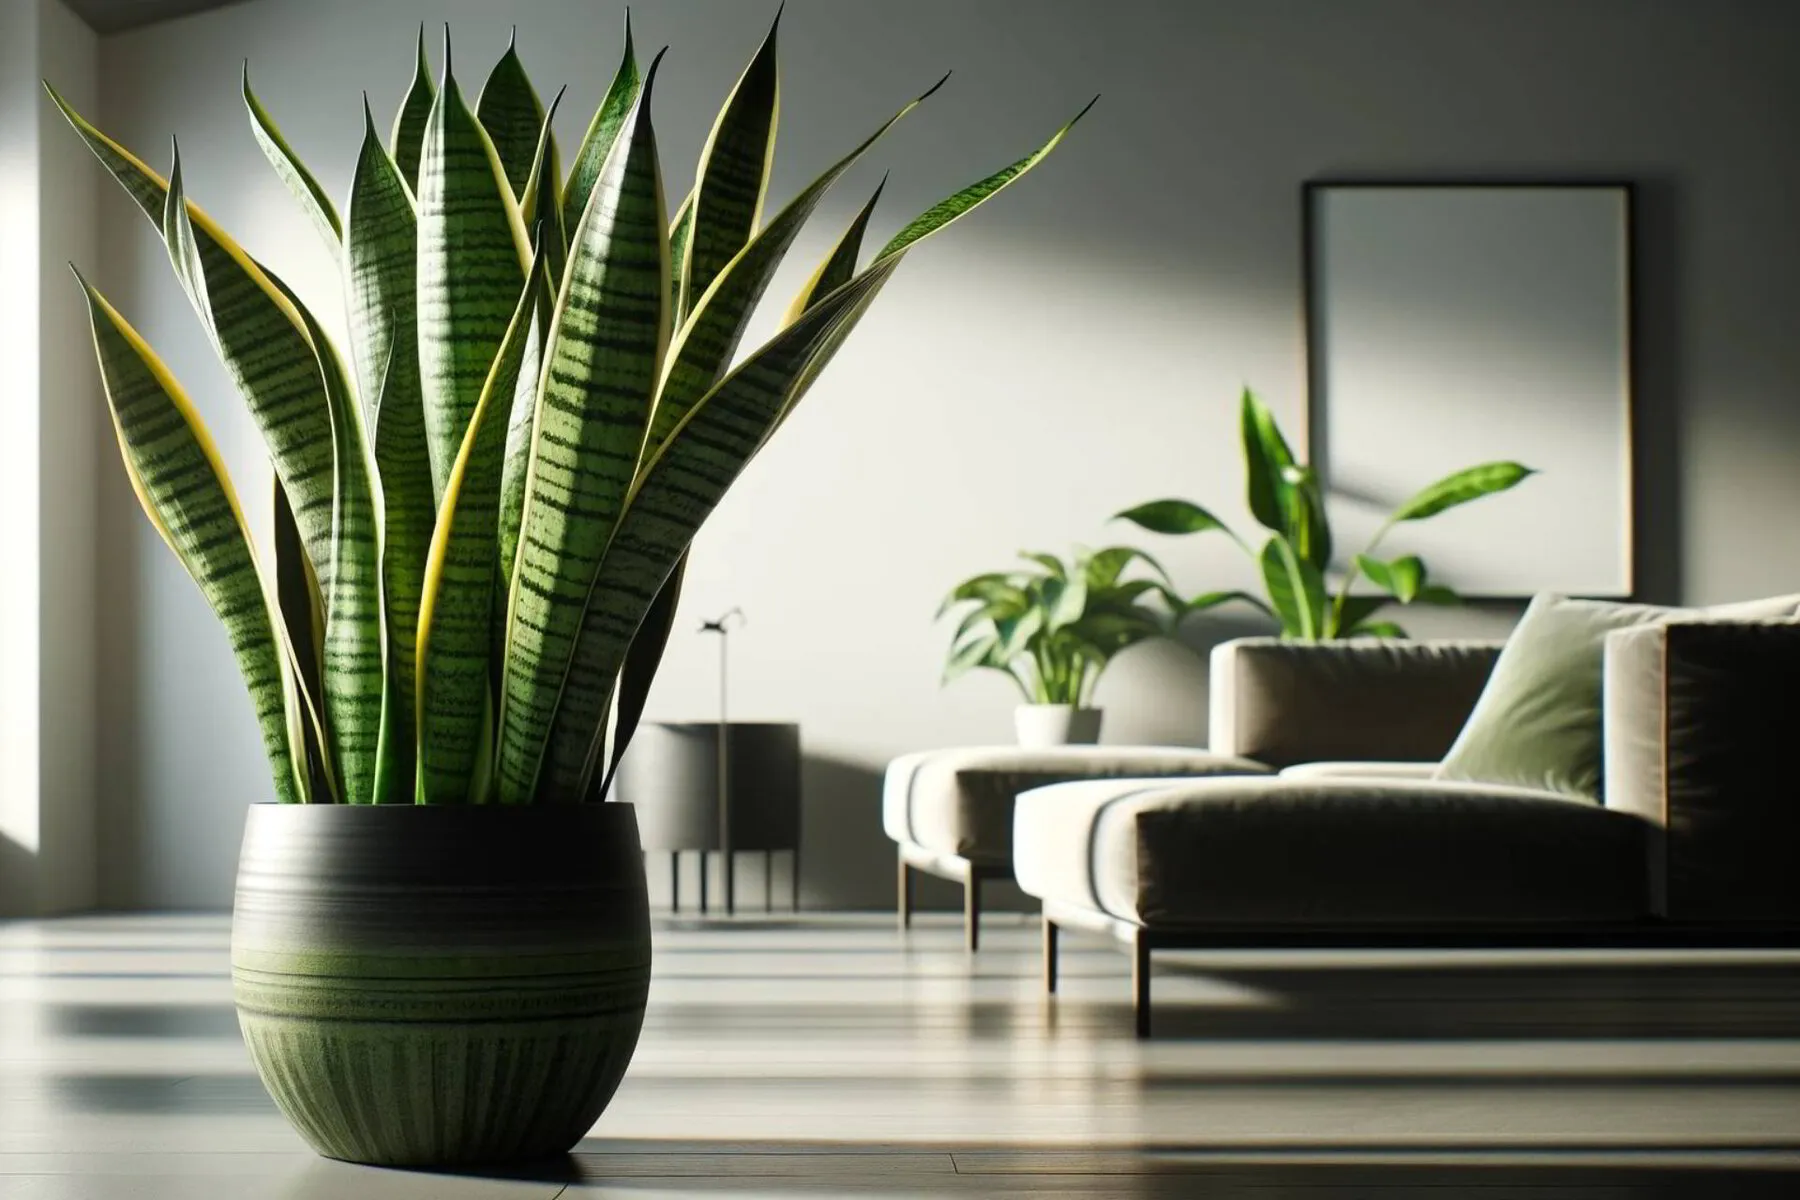 Spider Plant (Sansevieria) potted in a modern living room